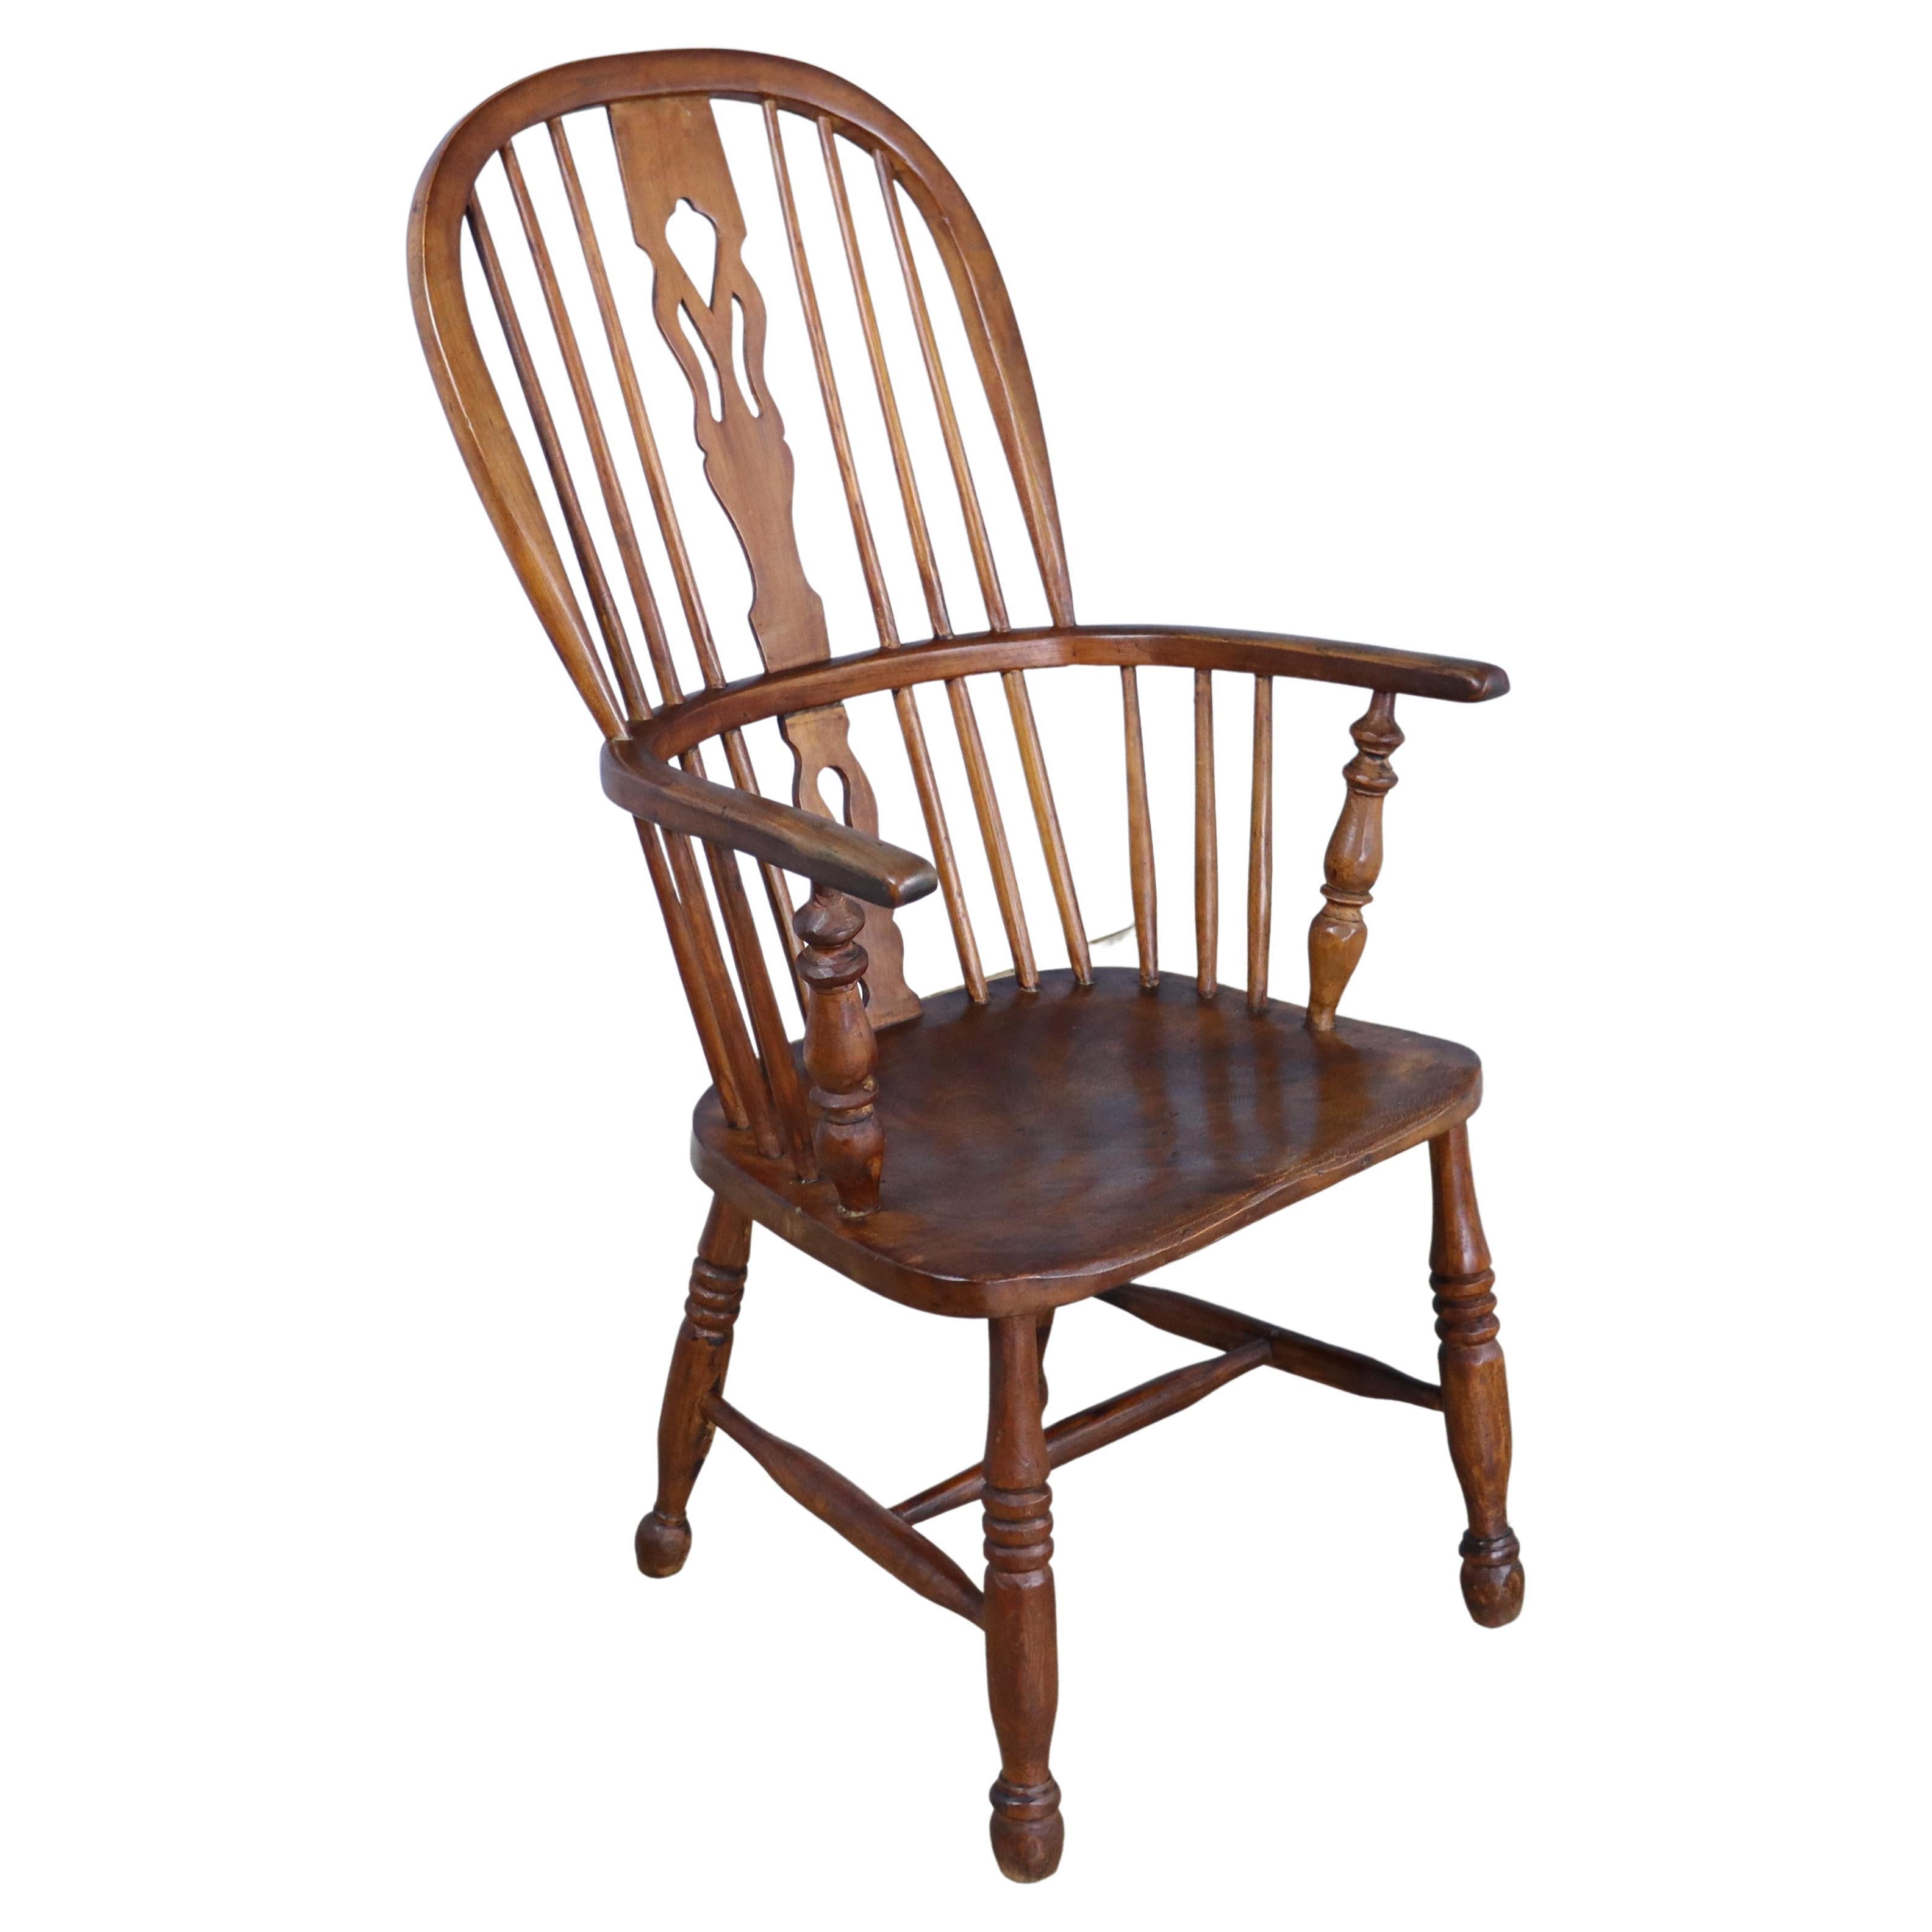 19th Century English Fruitwood Windsor Chair, Fiddleback Splat For Sale